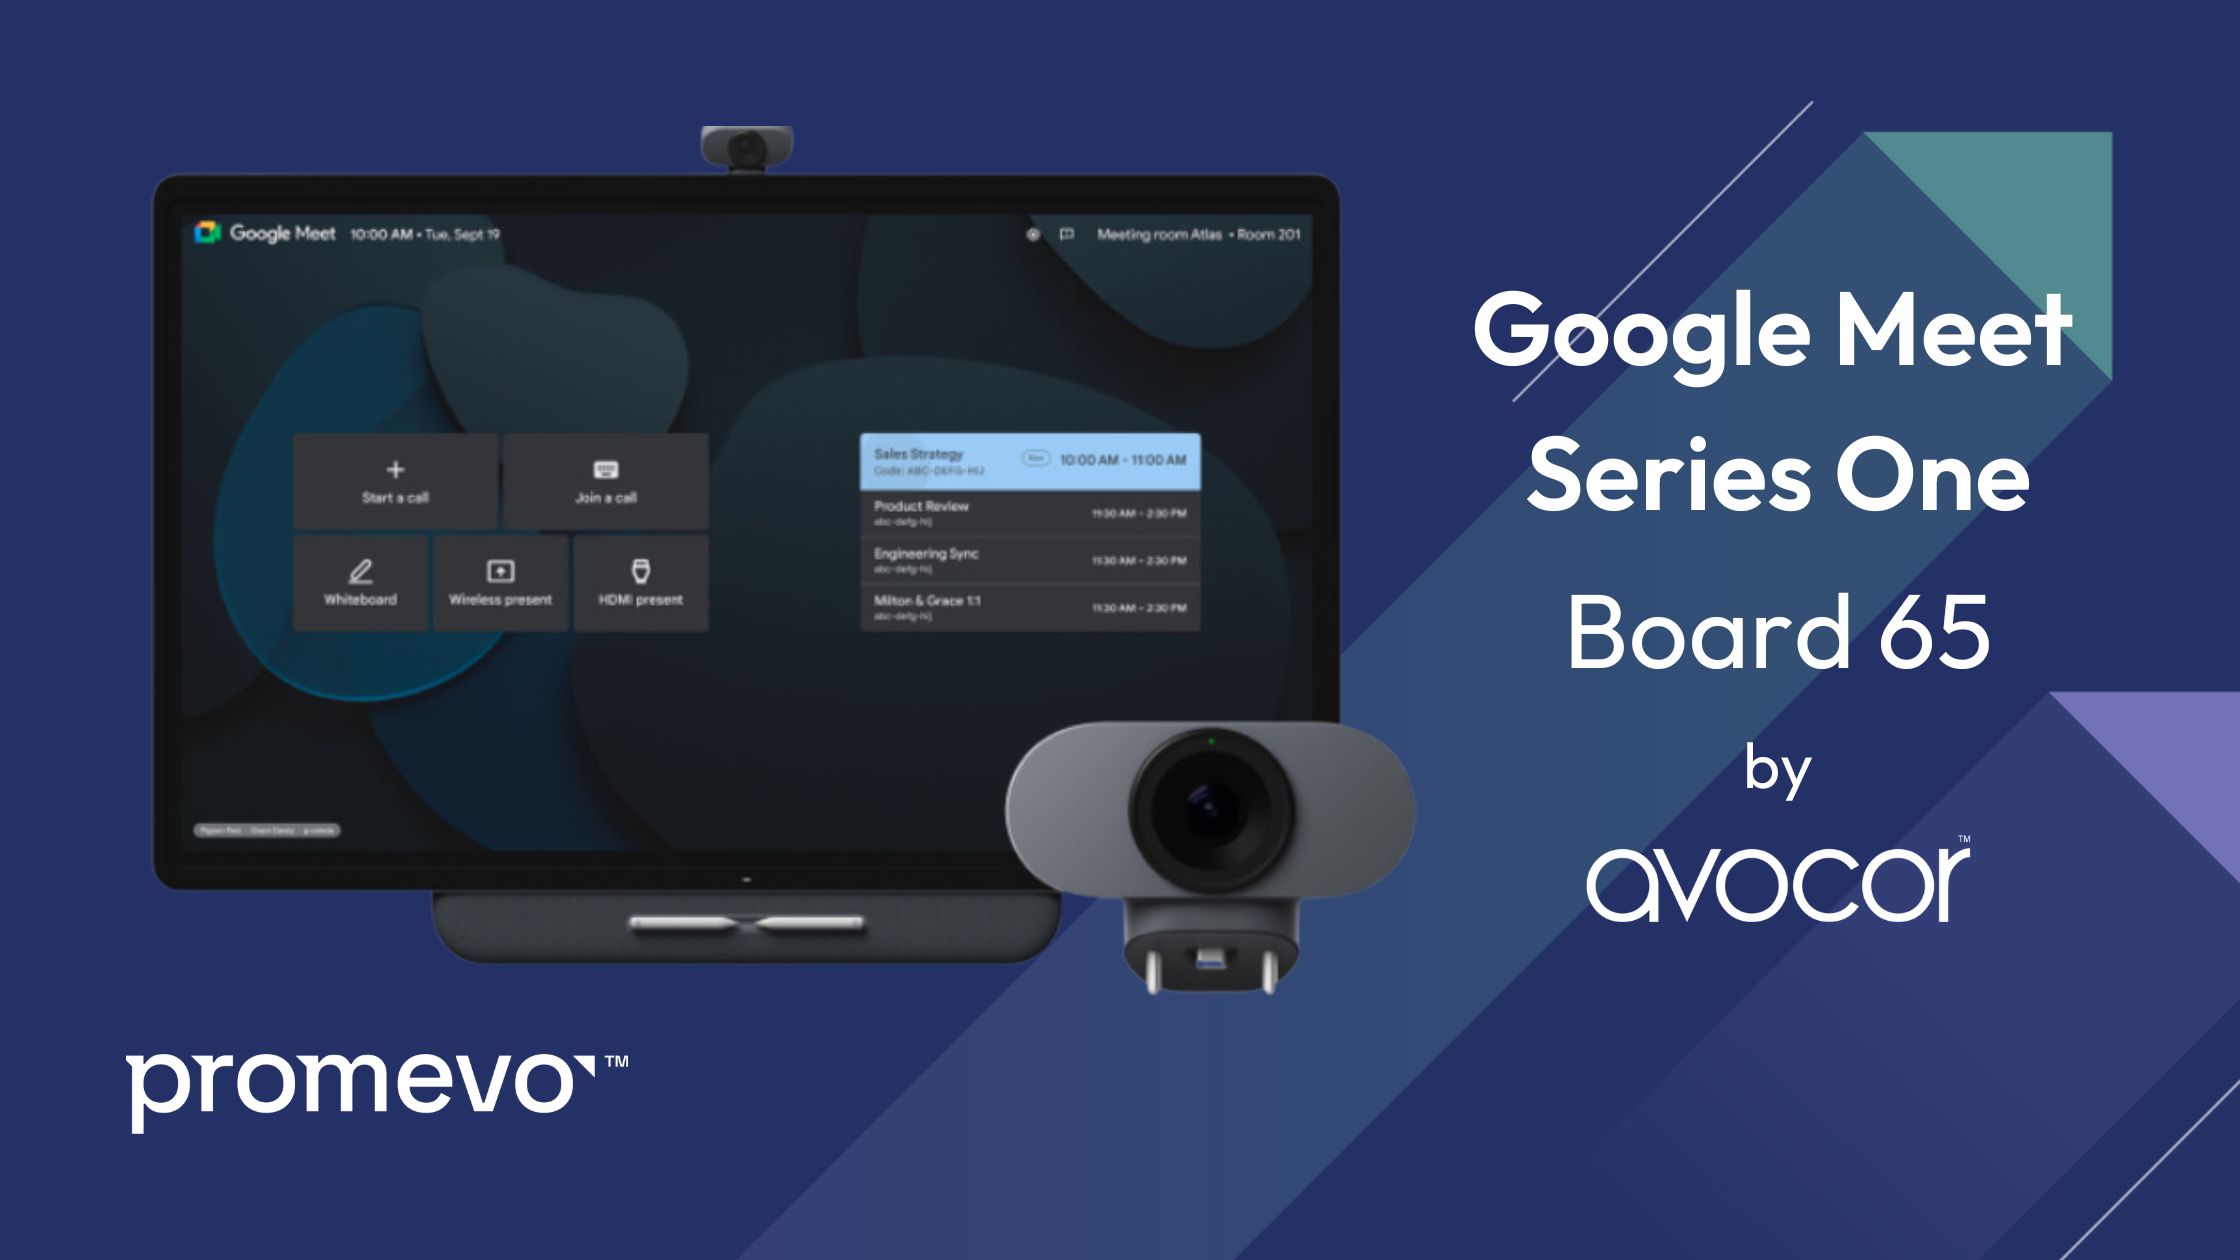 Google Meet Series One Board by Avocor is an excellent device for hybrid work